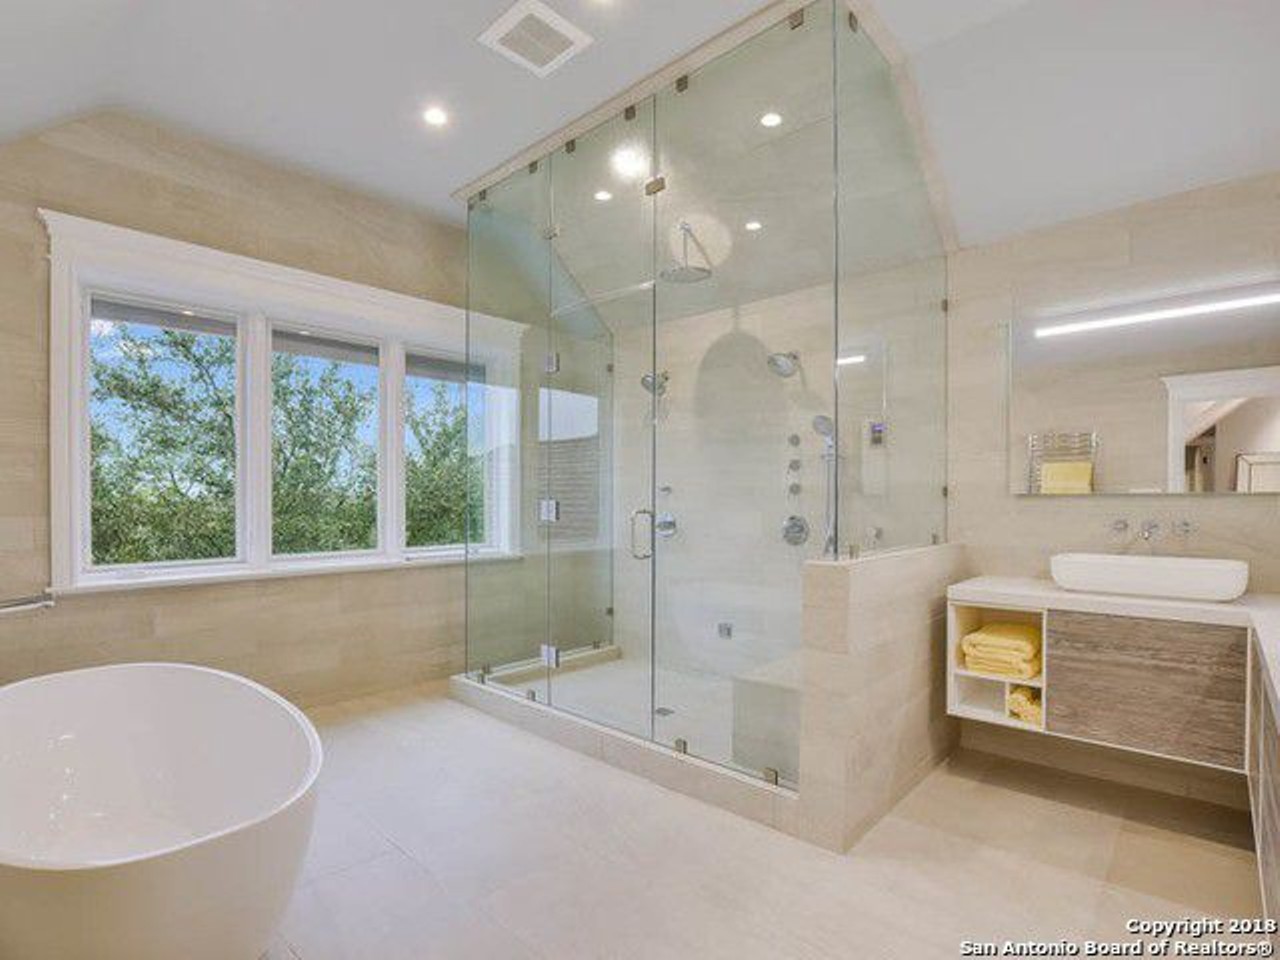 We don't know who would want to pass up this intrinsic shower.